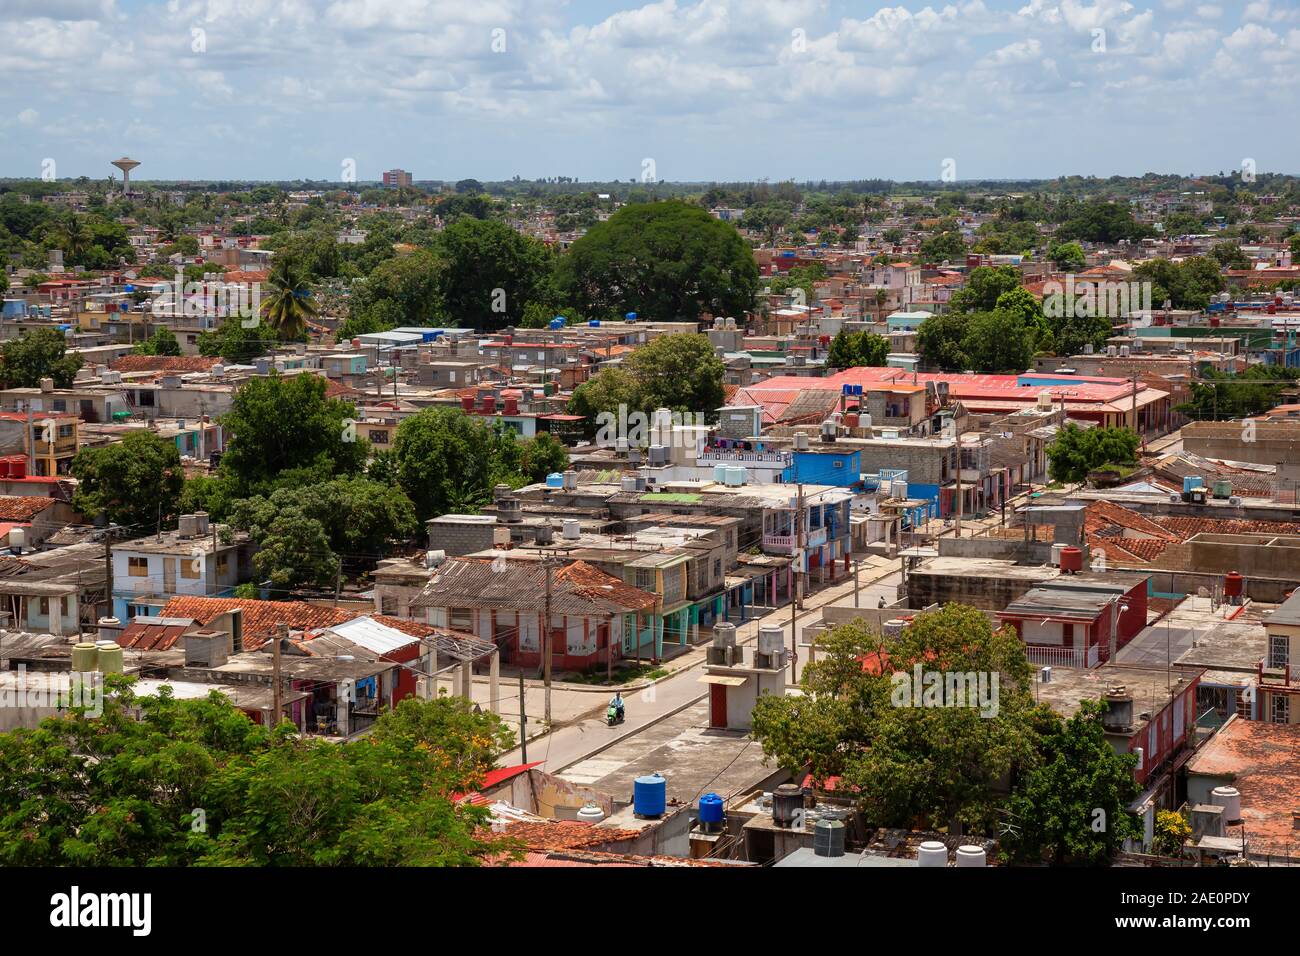 Aerial view of a small Cuban Town, Ciego de Avila, during a cloudy and sunny day. Located in Central Cuba. Stock Photo